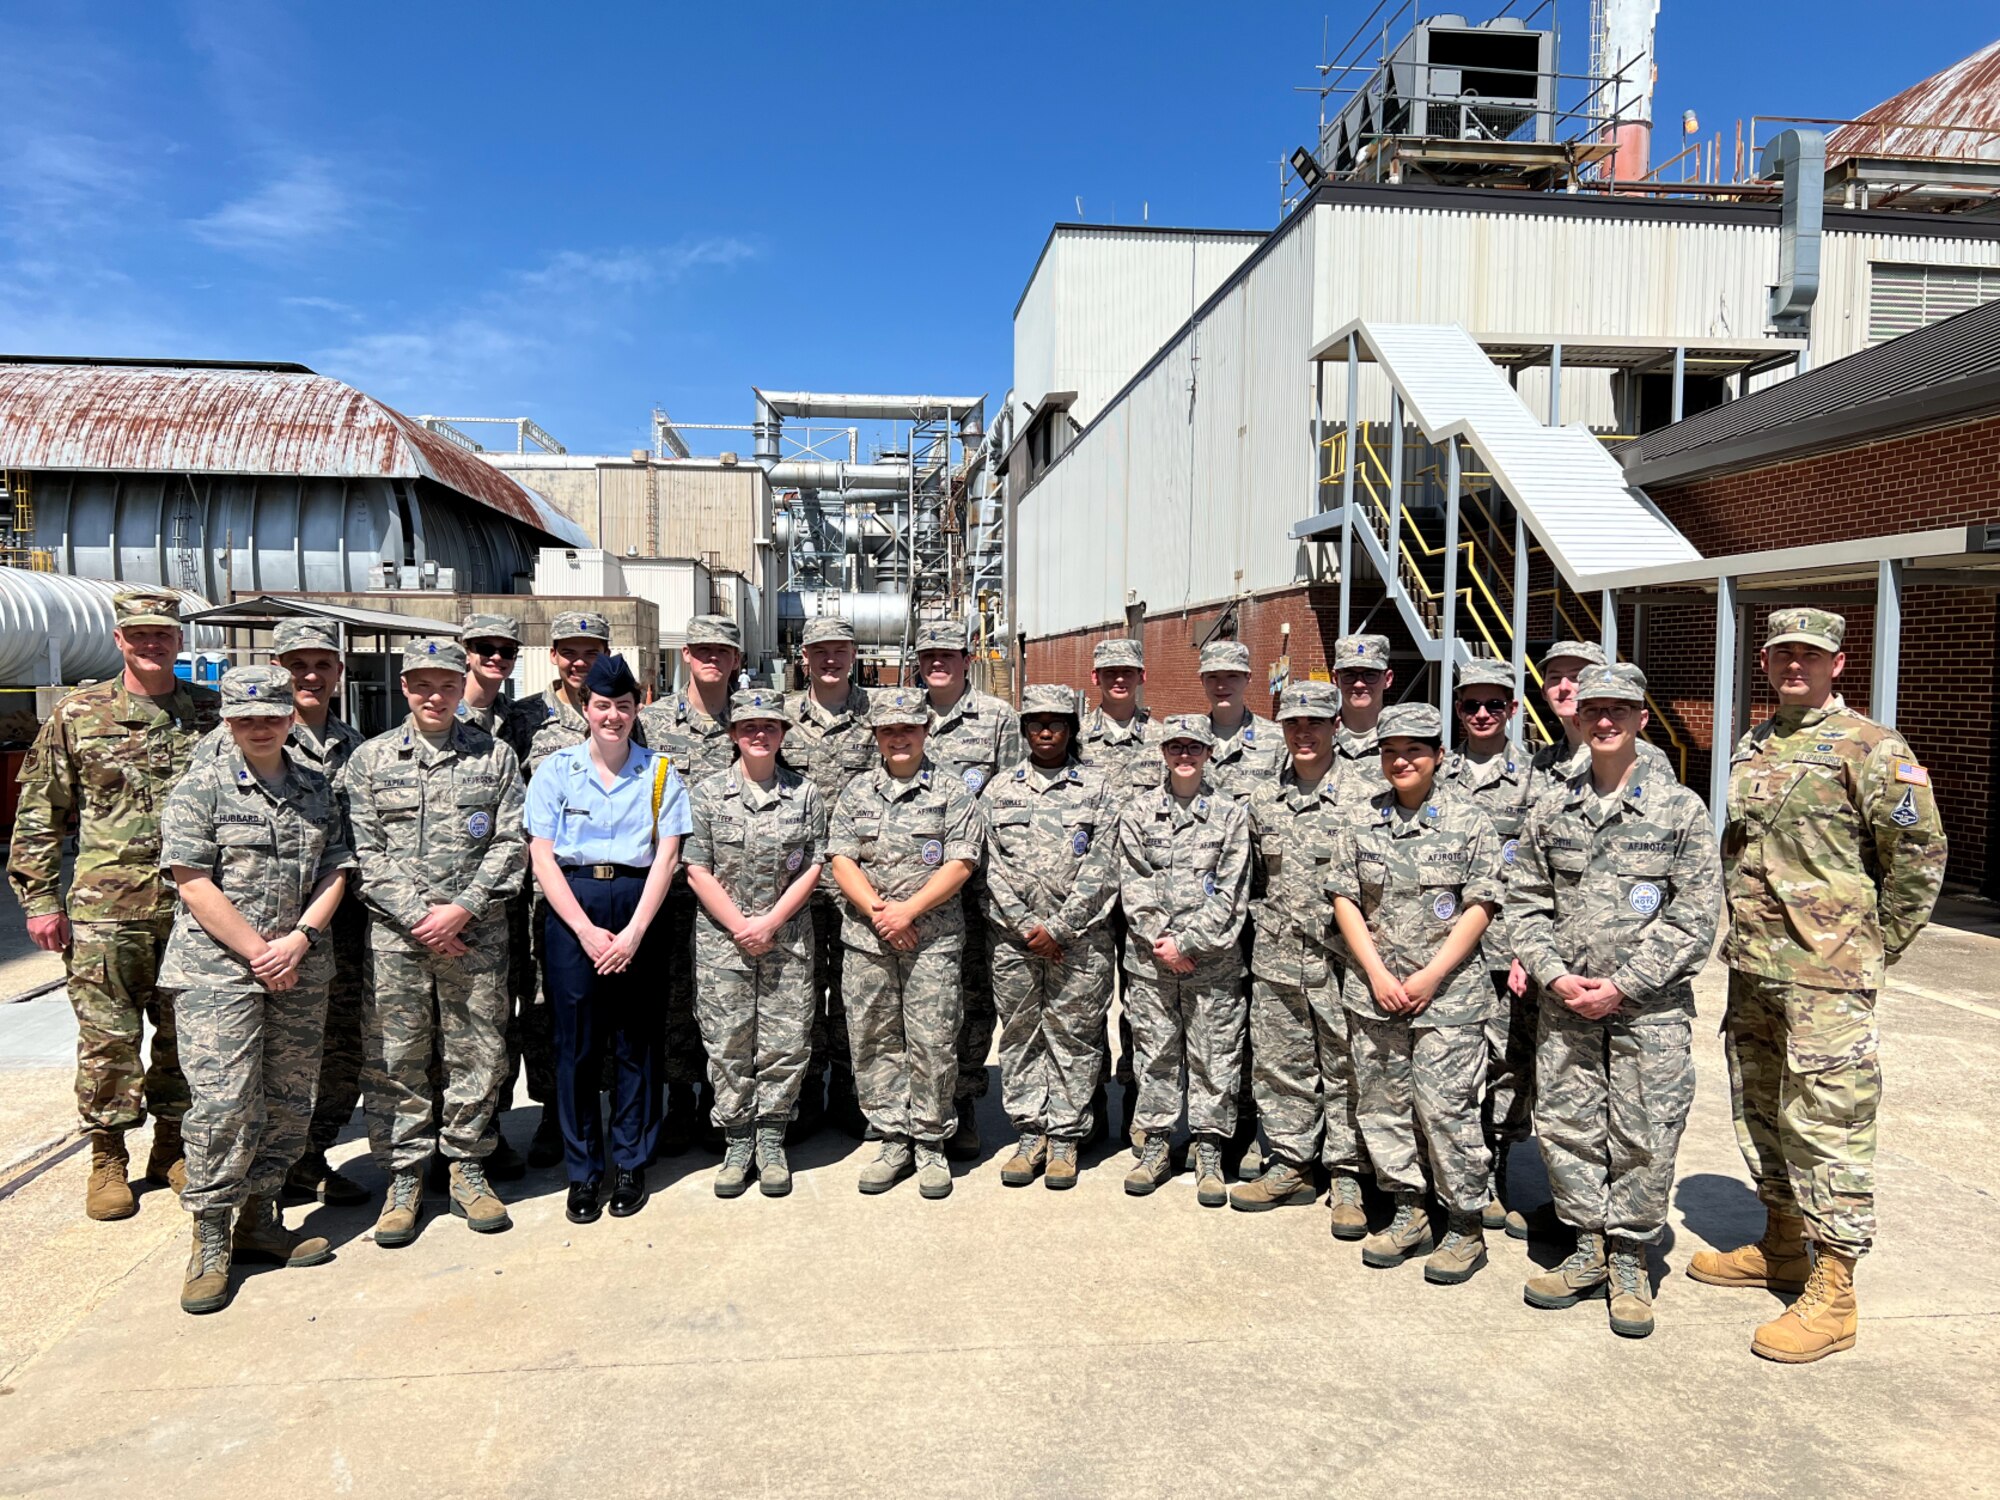 Cadets from the Air Force Junior ROTC and Space Force Junior ROTC programs at Huntsville High School in Huntsville, Alabama, pause for a photo during their visit at Arnold Air Force Base, Tenn., headquarters of Arnold Engineering Development Complex, April 13, 2022. Pictured with the cadets are, at left, Col. Carl Ise, Individual Mobilization Augmentee to the AEDC commander, and, at right, 1st Lt. Michael Hareld, a U.S. Space Force guardian and program manager for the AEDC Hypersonic Systems Test Branch. (Courtesy photo)